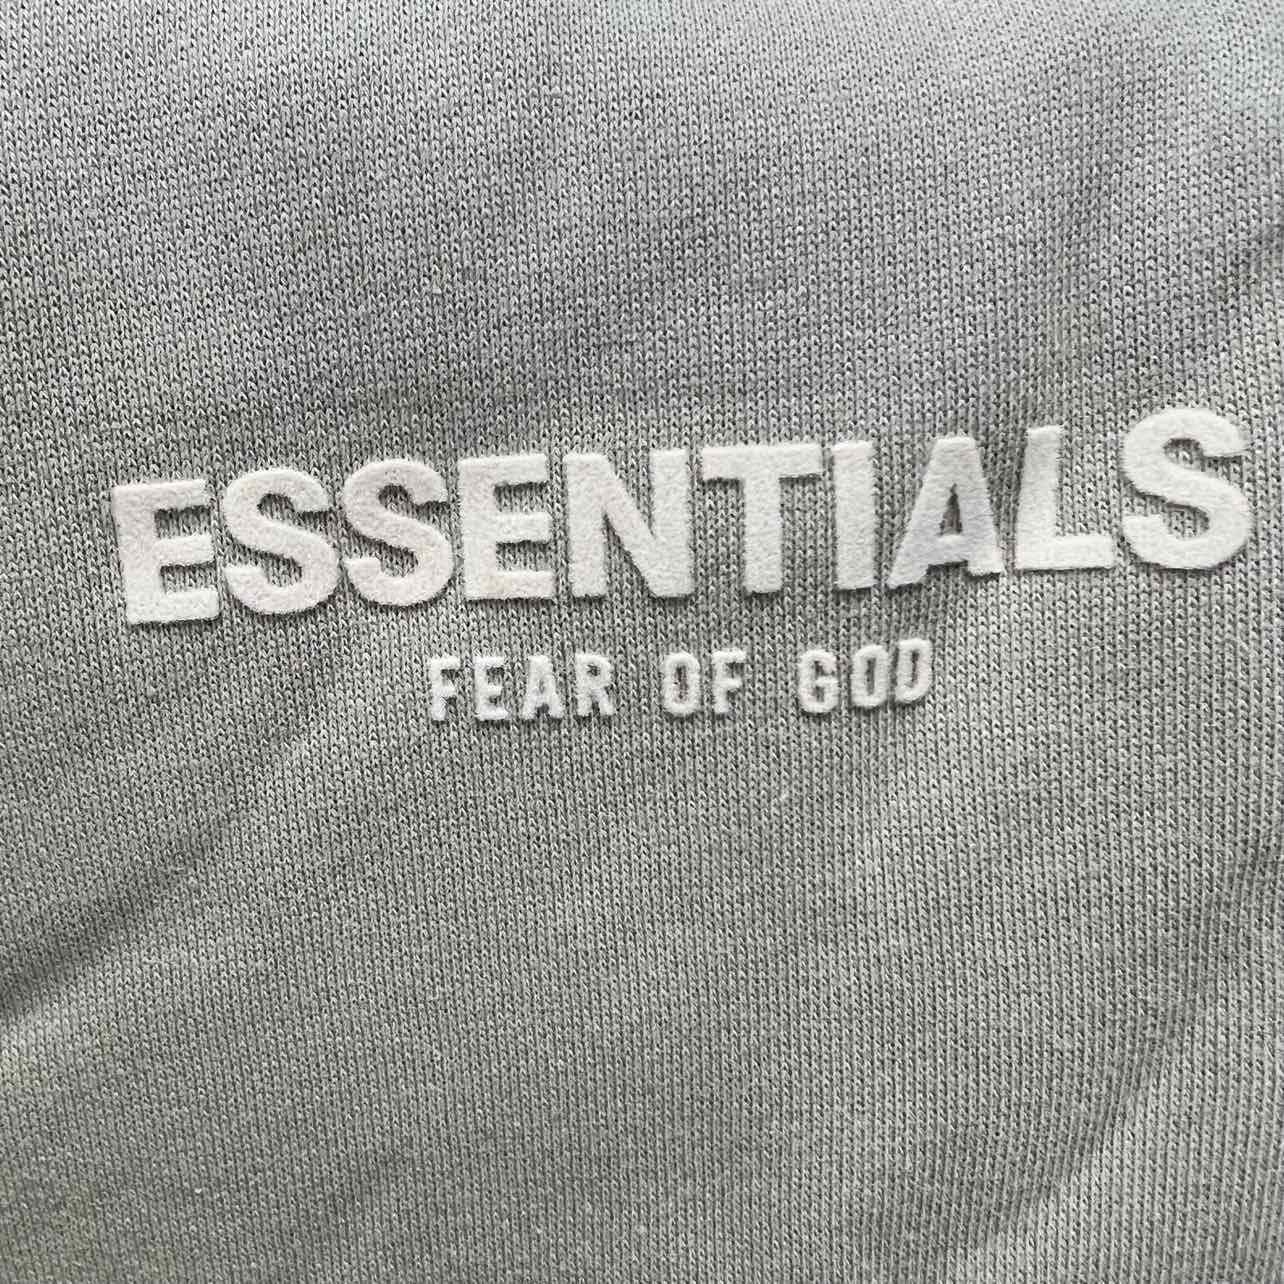 Fear of God Relaxed Sweatpants "ESSENTIALS" Seafoam New Size 2XL